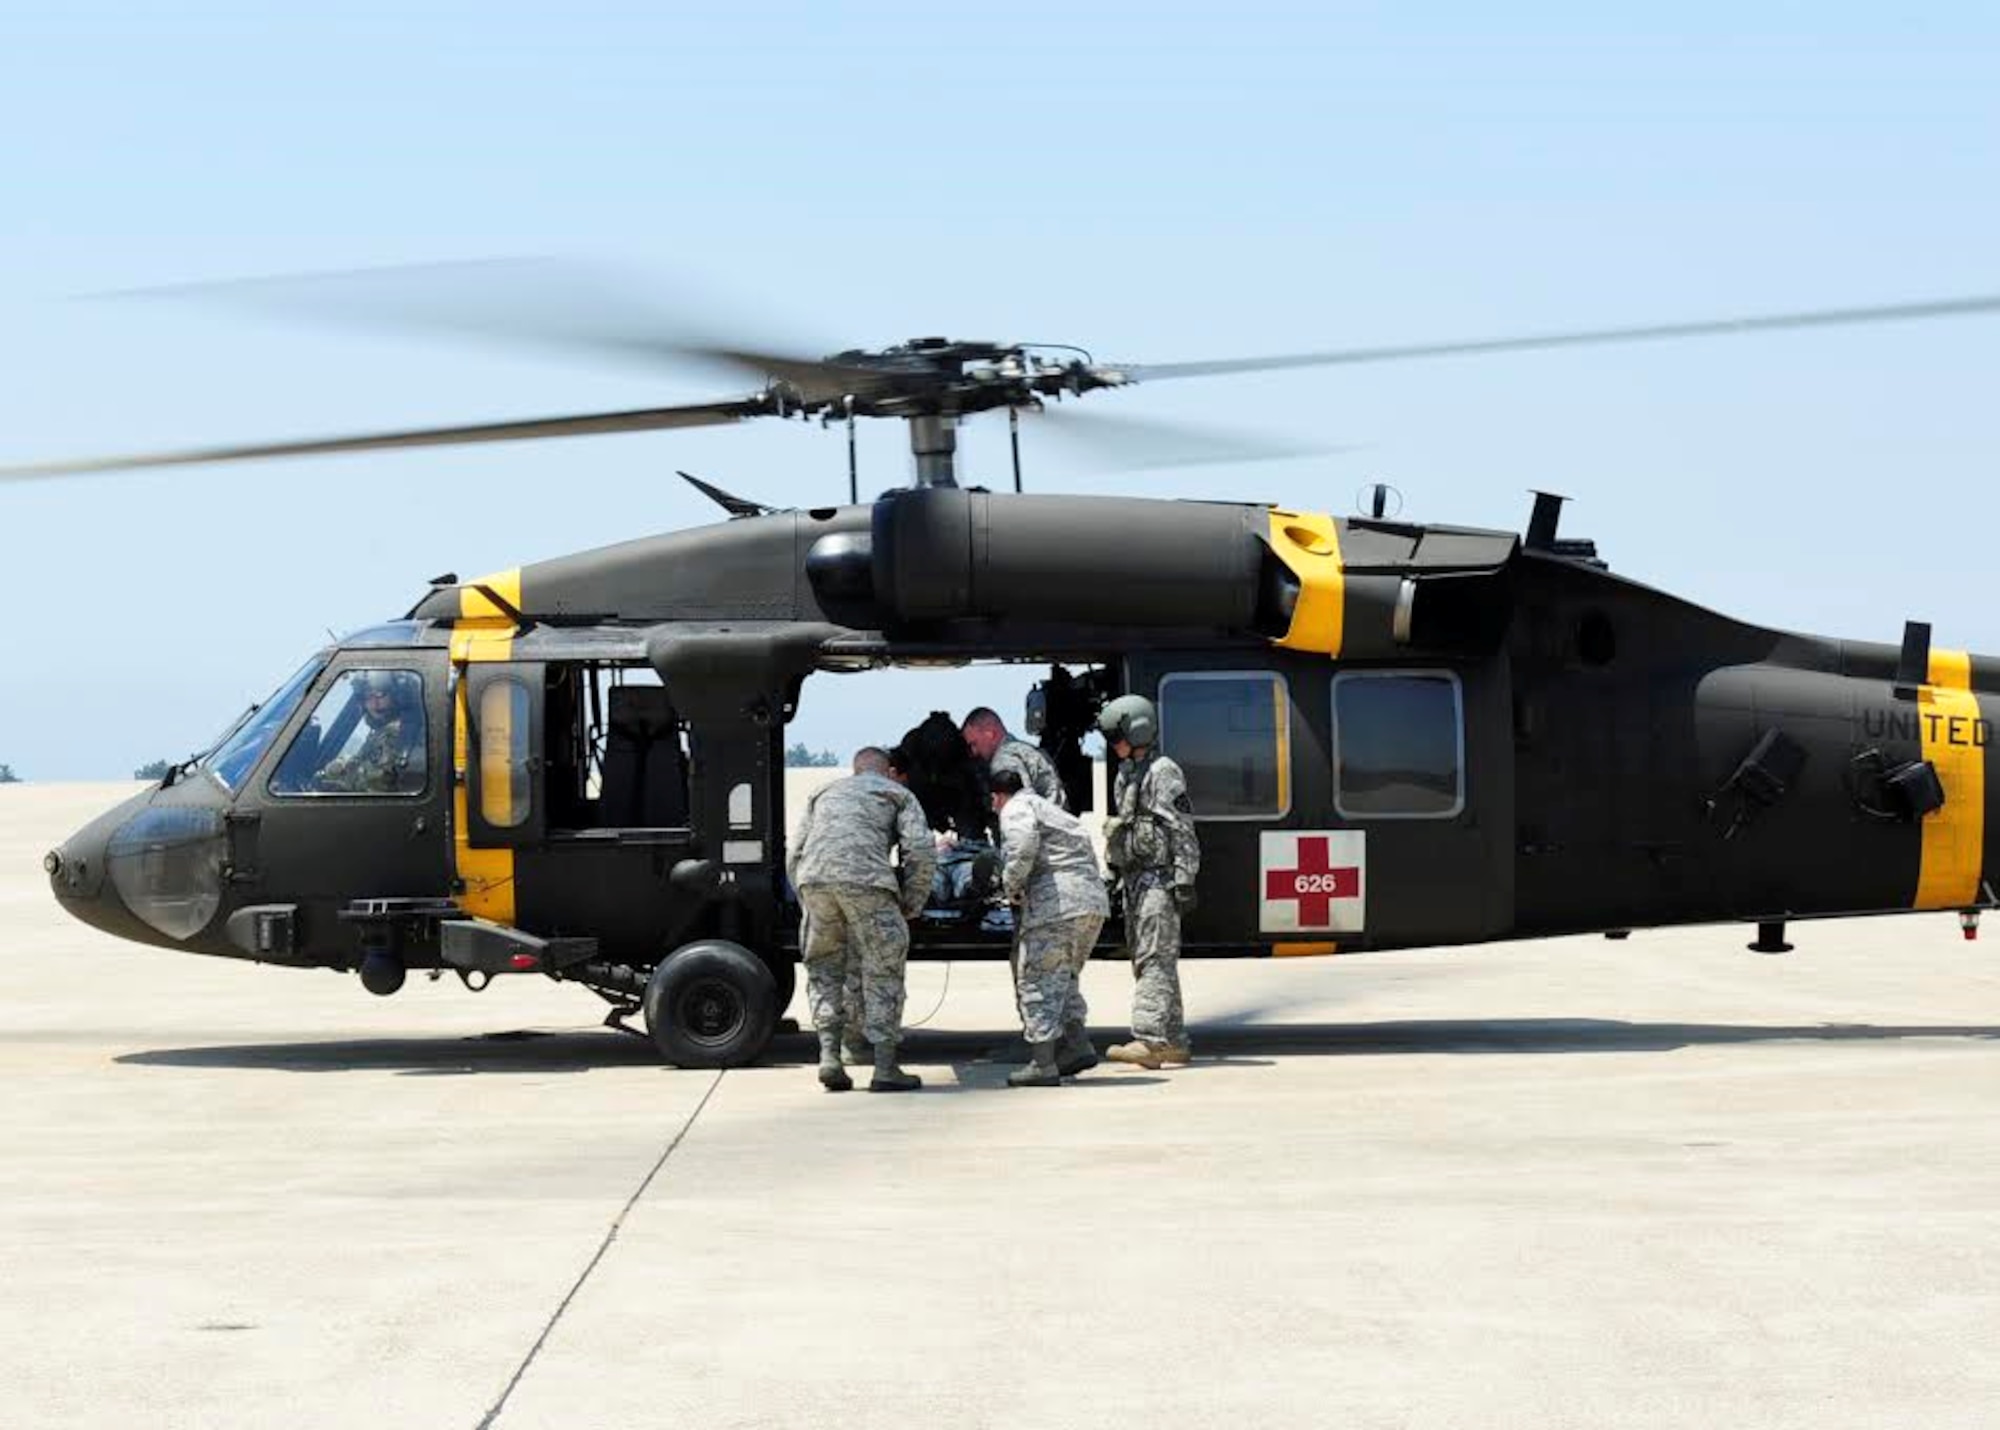 Airmen from the 8th Medical Group carry a simulated patient to a UH-60 Black Hawk medevac helicopter at Kunsan Air Base, Republic of Korea, May 17, 2017. The purpose of the training was aimed to train medics on loading patients onto a helicopter for dust-off. (U.S. Air Force photo/Staff Sgt. Chelsea Sweatt)